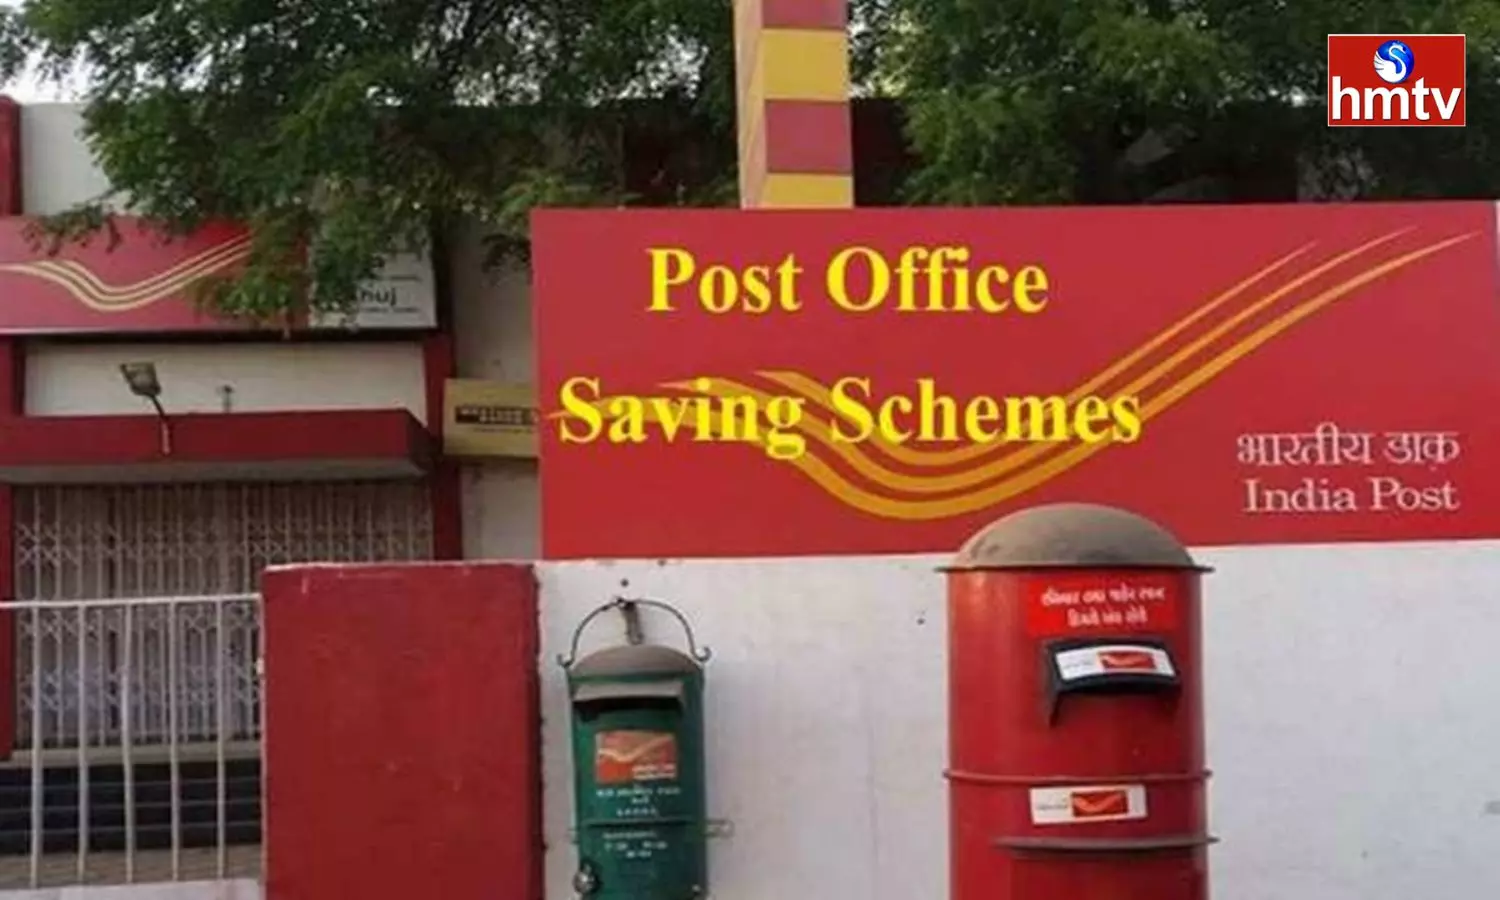 Post office time Deposit Scheme in which you Get Higher Interest than Bank